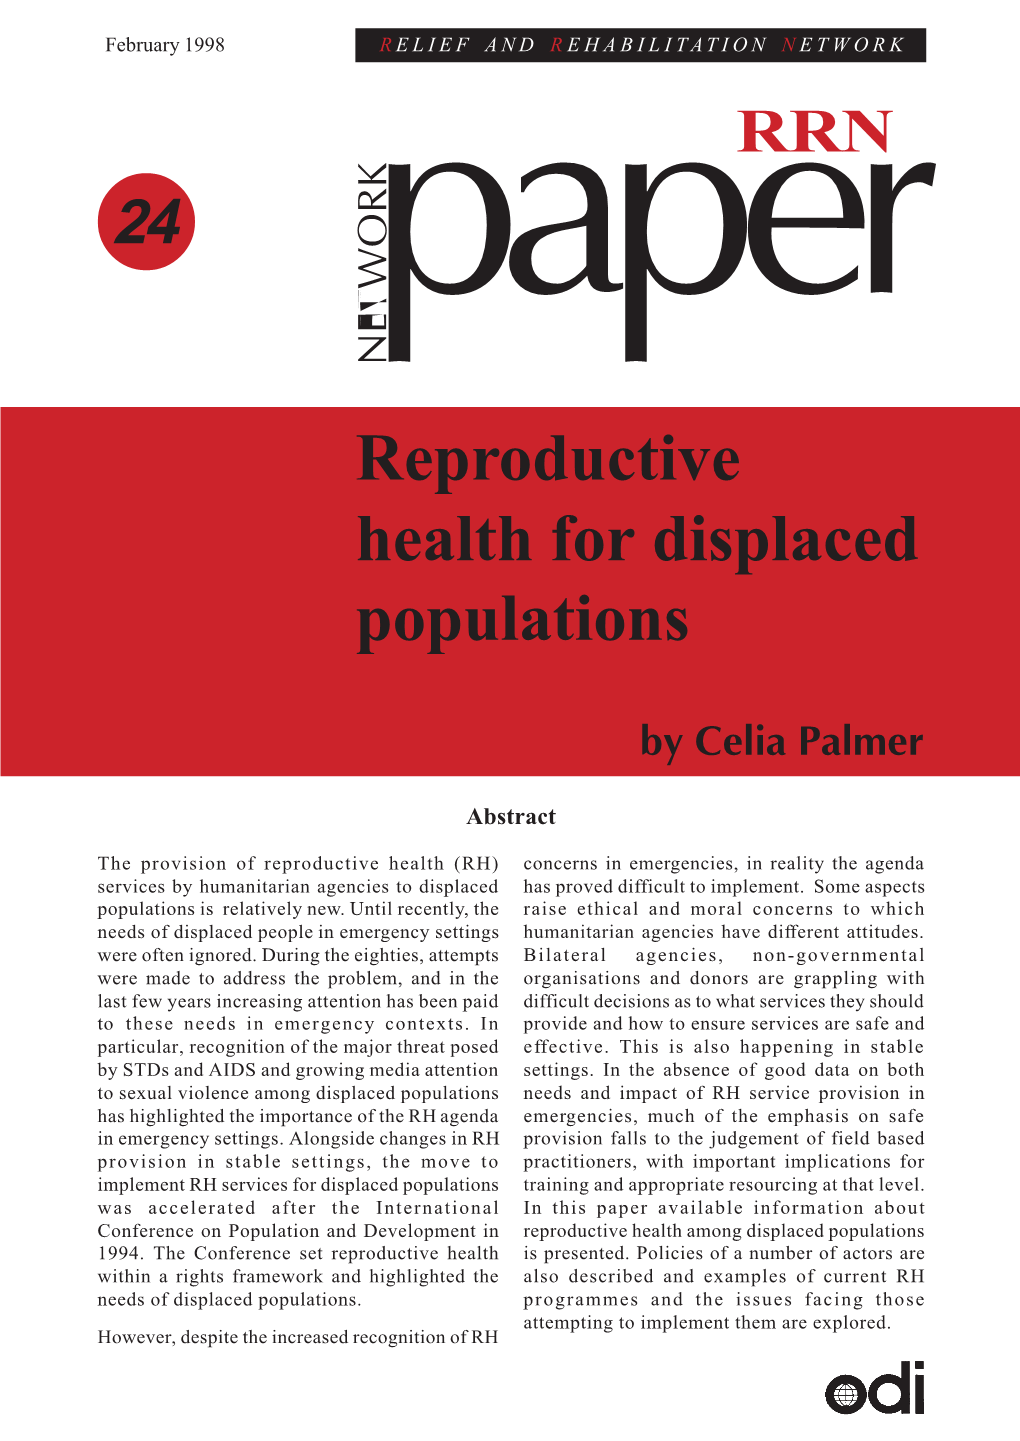 Reproductive Health for Displaced Populations